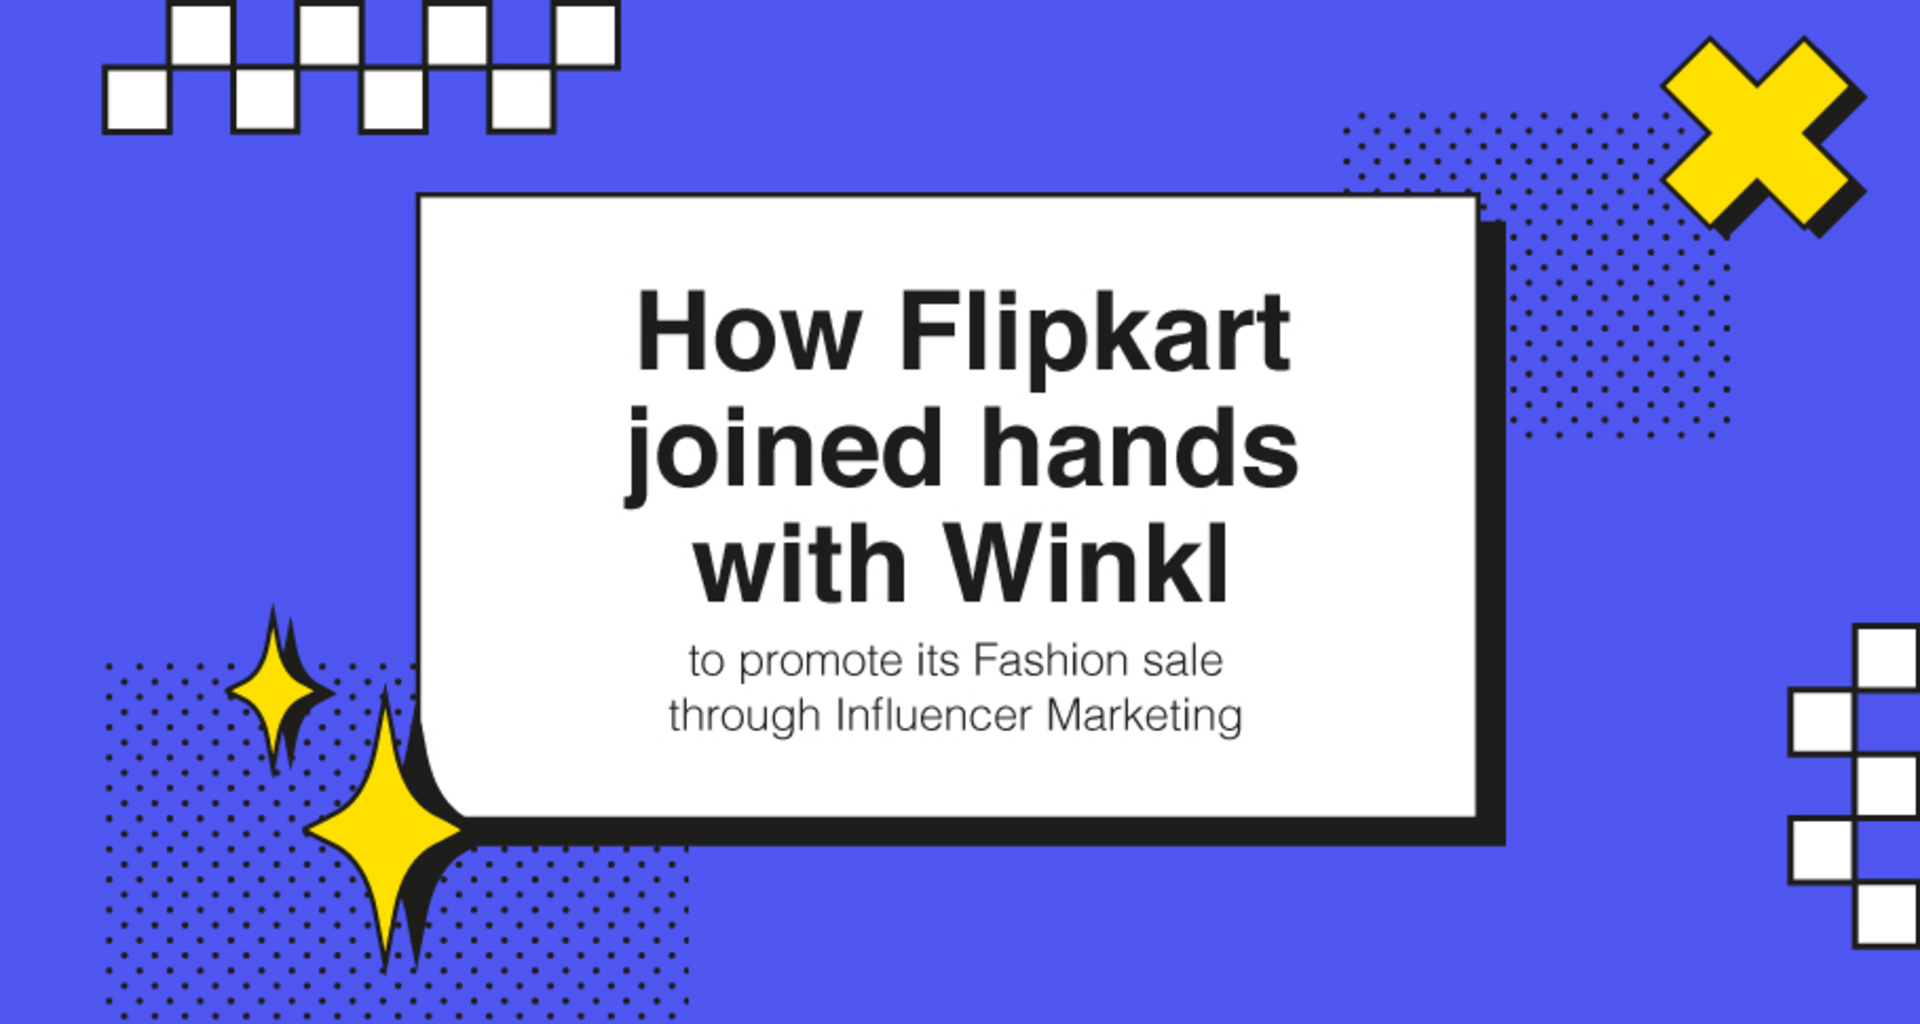 How Flipkart joined hands with Winkl to promote its Fashion sale through Influencer Marketing  - blog by Winkl (An influencer marketing platform)